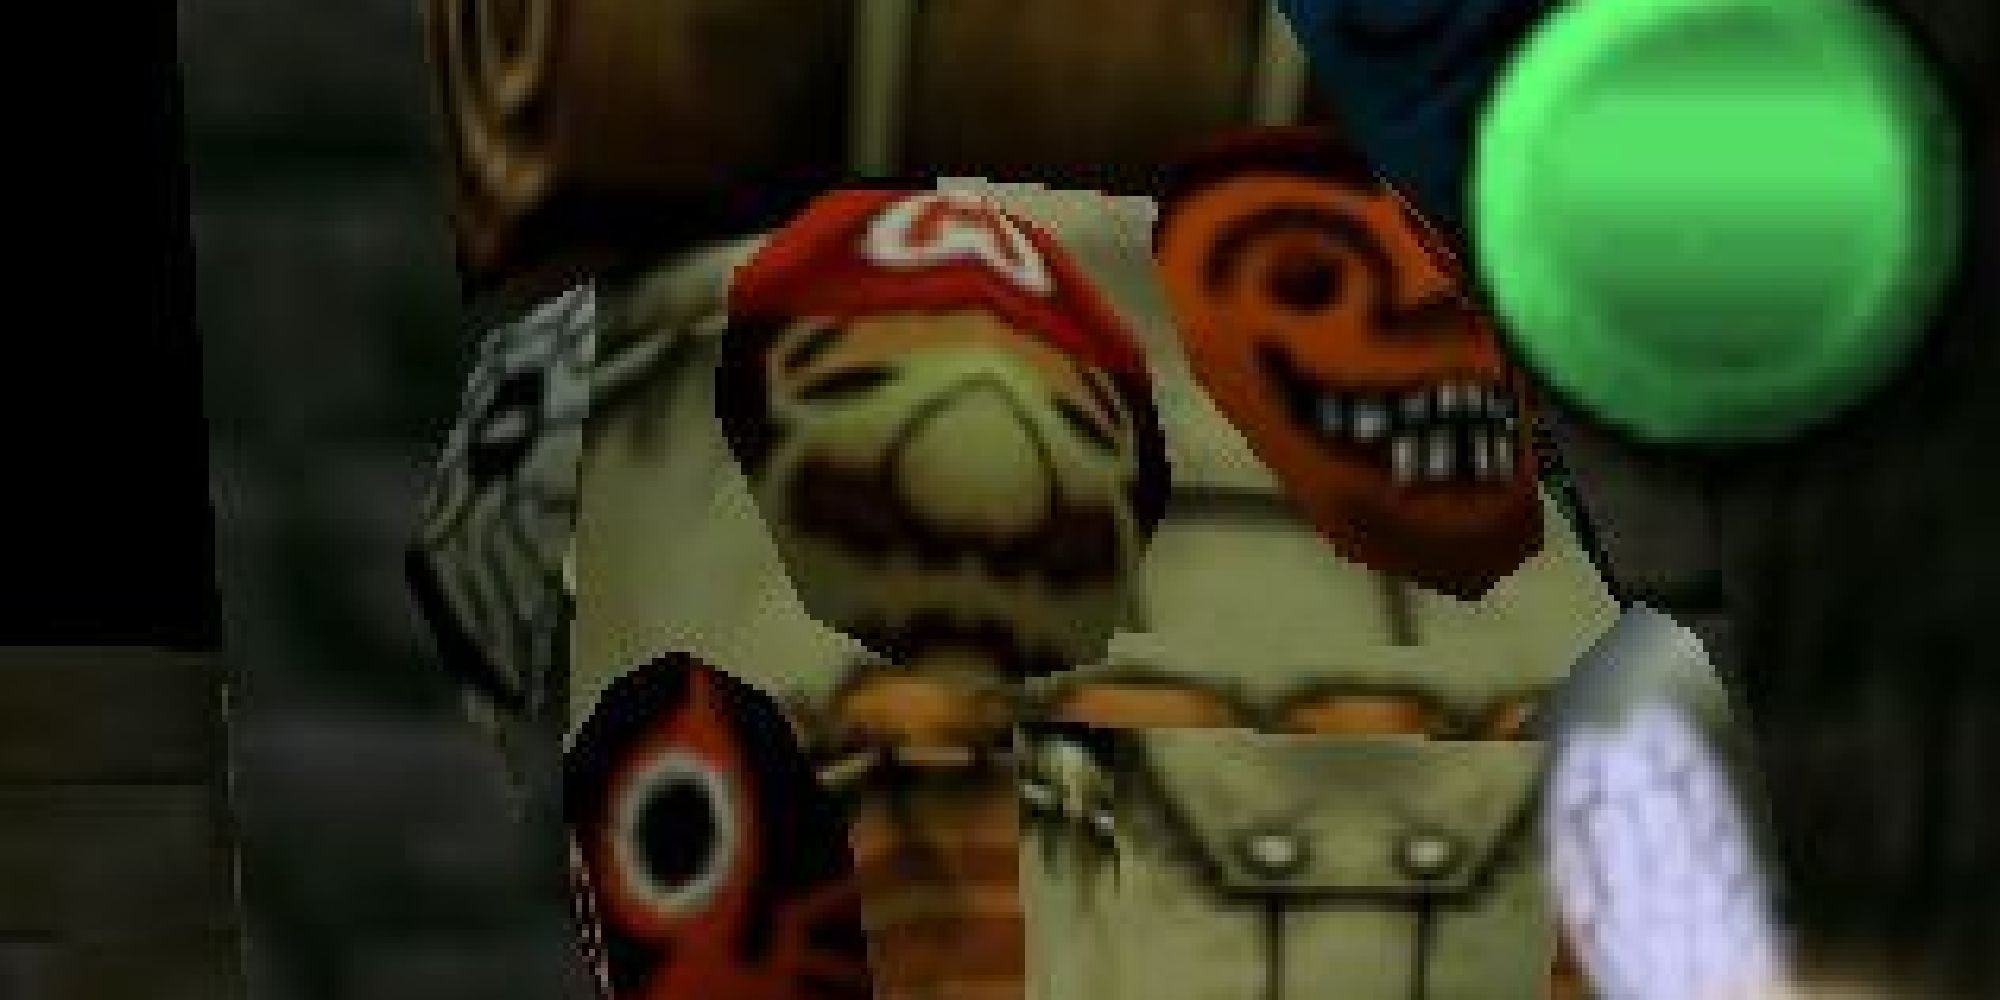 Mask of Mario's face on the back of the Happy Mask Salesman's bag